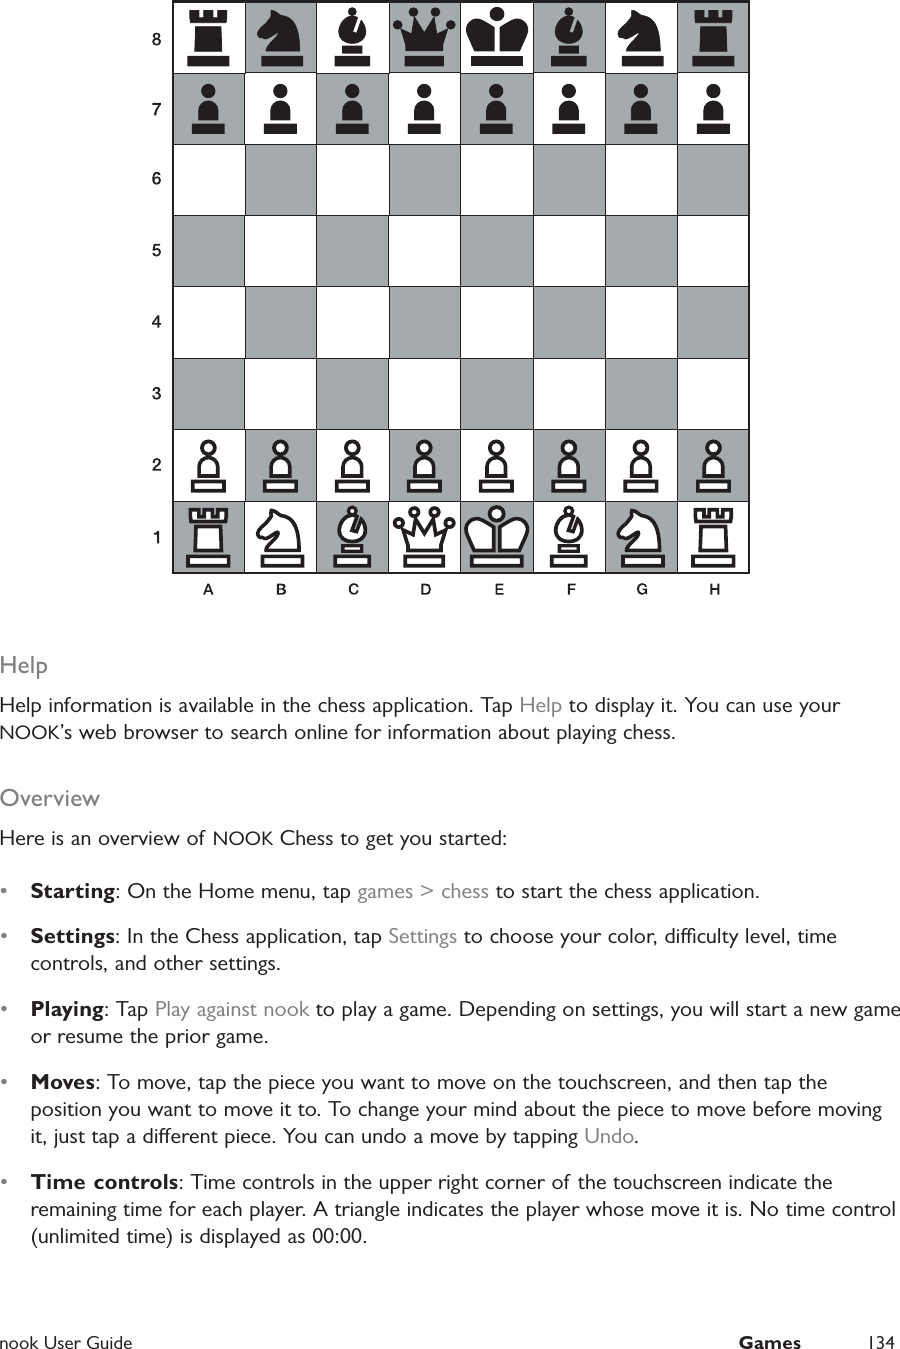  nook User Guide  Games 134HelpHelp information is available in the chess application. Tap Help to display it. You can use your NOOK’s web browser to search online for information about playing chess.OverviewHere is an overview of  NOOK Chess to get you started:•  Starting: On the Home menu, tap games &gt; chess to start the chess application.•  Settings: In the Chess application, tap Settings to choose your color, diculty level, time controls, and other settings.•  Playing: Tap Play against nook to play a game. Depending on settings, you will start a new game or resume the prior game.•  Moves: To move, tap the piece you want to move on the touchscreen, and then tap the position you want to move it to. To change your mind about the piece to move before moving it, just tap a dierent piece. You can undo a move by tapping Undo.•  Time controls: Time controls in the upper right corner of the touchscreen indicate the remaining time for each player. A triangle indicates the player whose move it is. No time control (unlimited time) is displayed as 00:00.